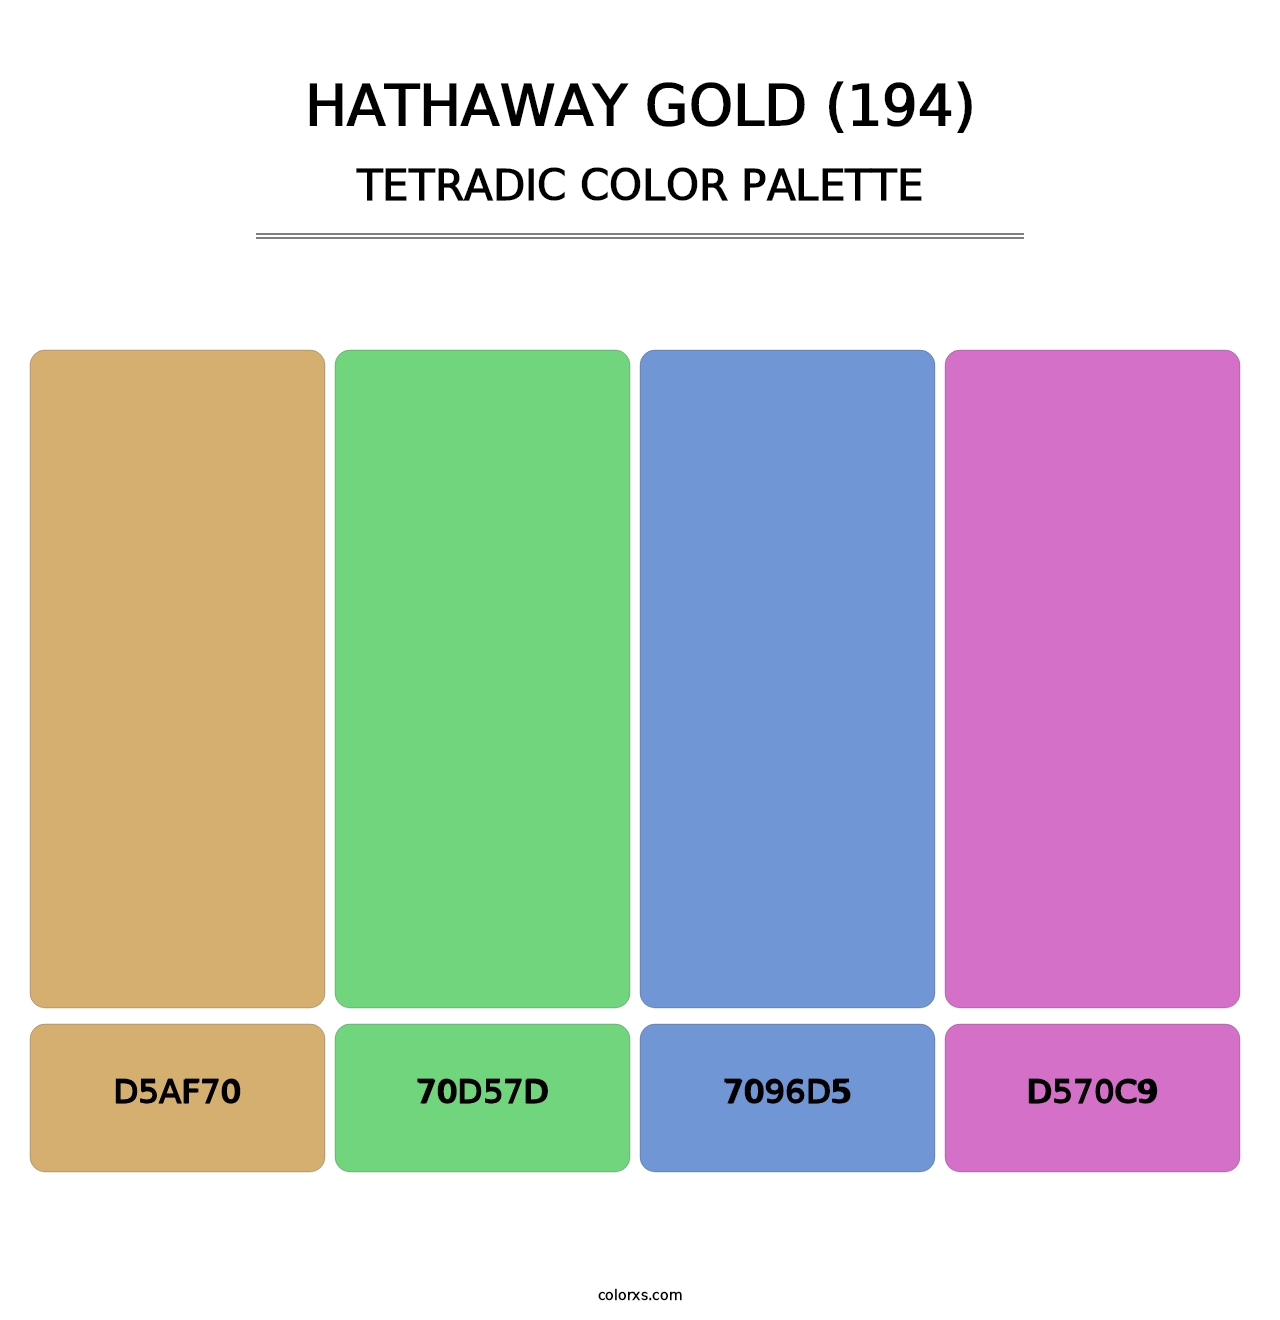 Hathaway Gold (194) - Tetradic Color Palette